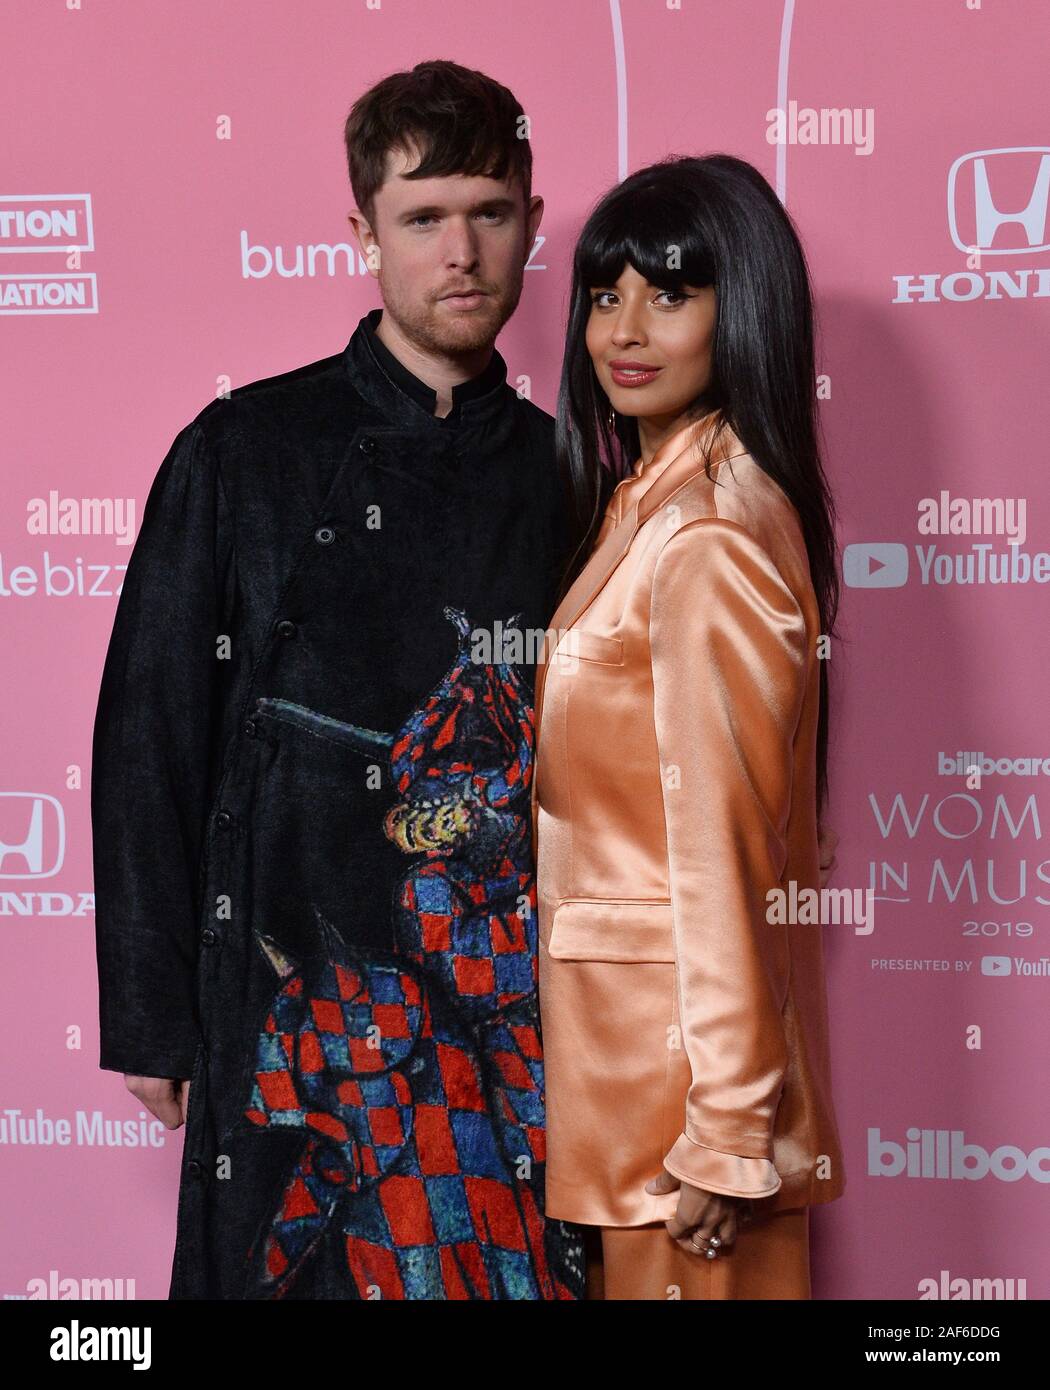 Los Angeles, United States. 13th Dec, 2019. James Blake (L) and Jameela Jamil arrive for the 14th annual Billboard Women in Music event at the Hollywood Palladium in Los Angeles on Thursday, December 12, 2019. Taylor Swift became the first-ever recipient of Billboard's Woman of the Decade Award. Alanis Morissette, Nicki Minaj, Brandi Carlile and Roc Nation chief operating officer Desiree Perez were also honored at the gathering. Photo by Jim Ruymen/UPI Credit: UPI/Alamy Live News Stock Photo